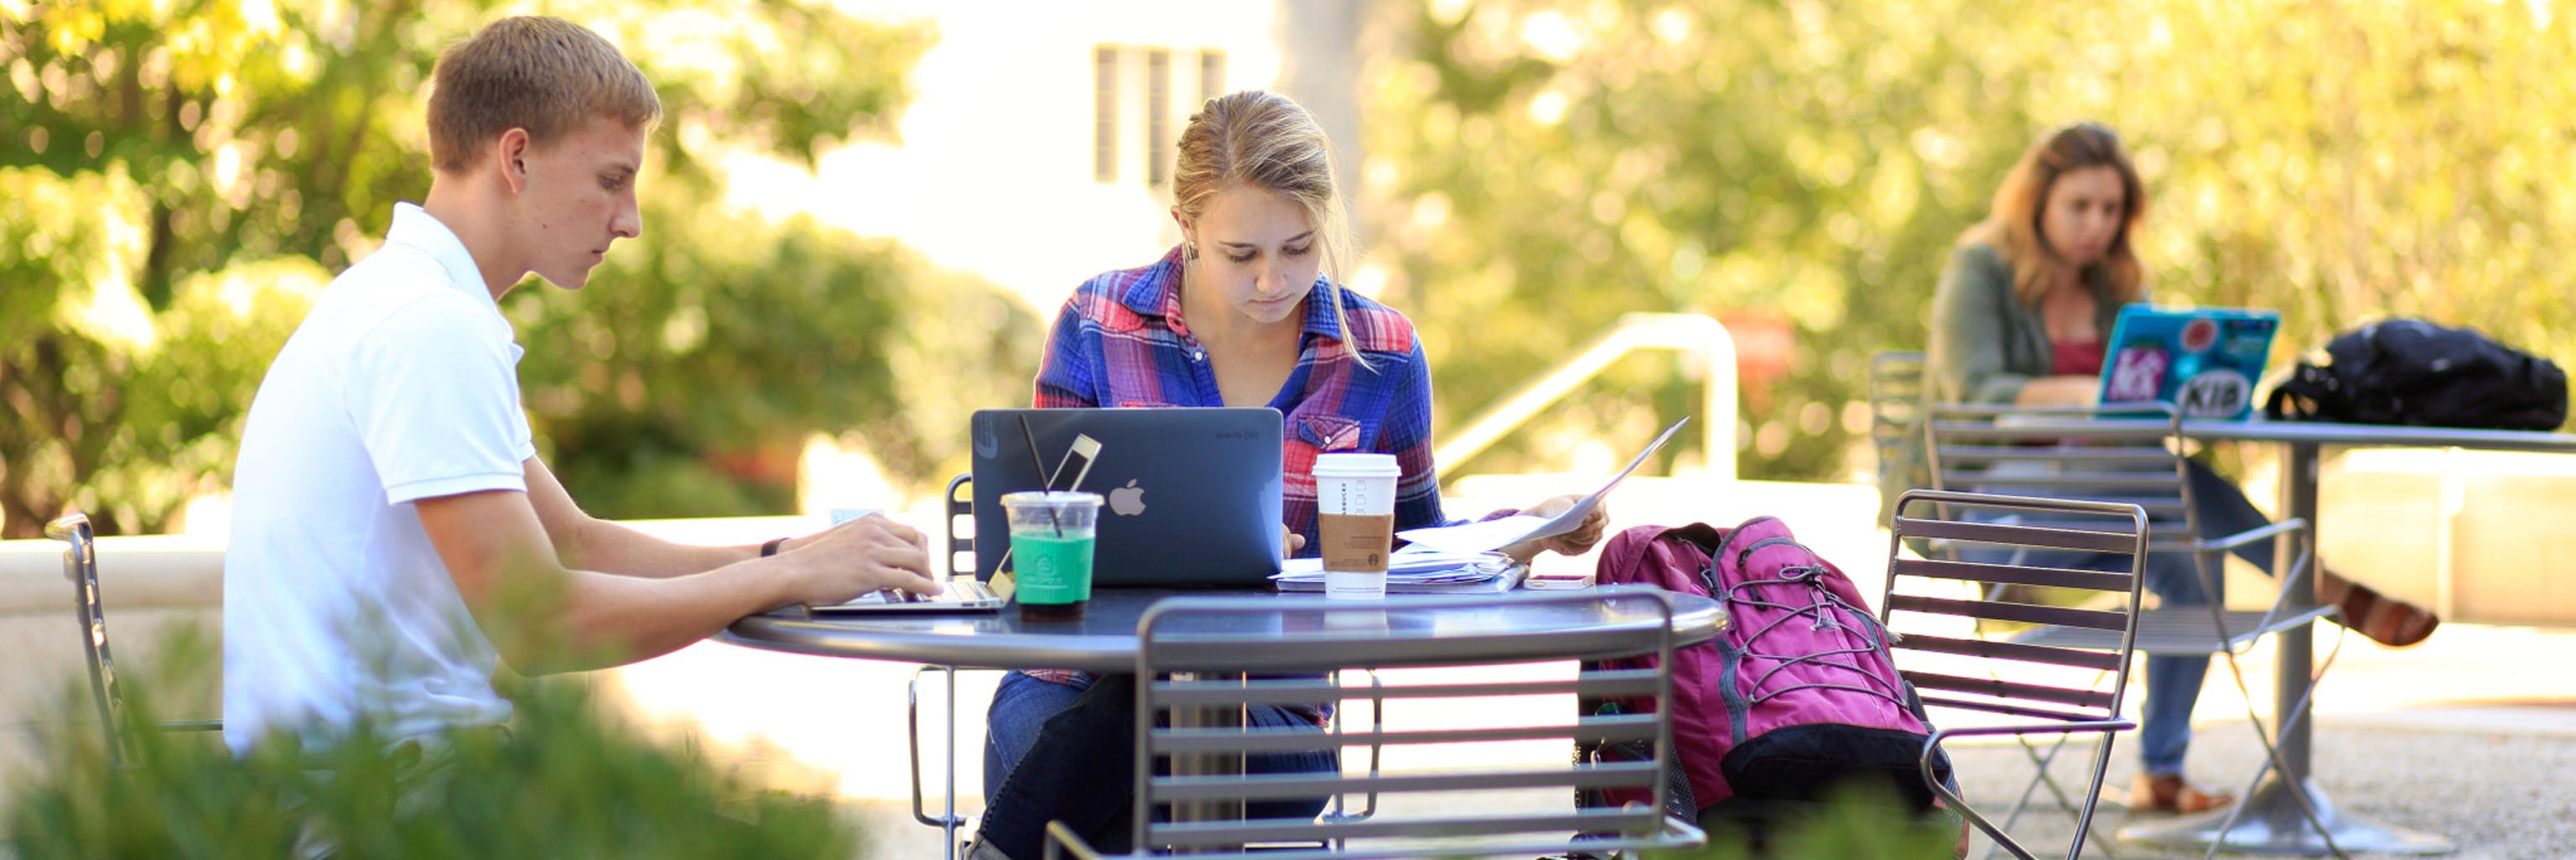 Three students sit outdoors working on their laptops